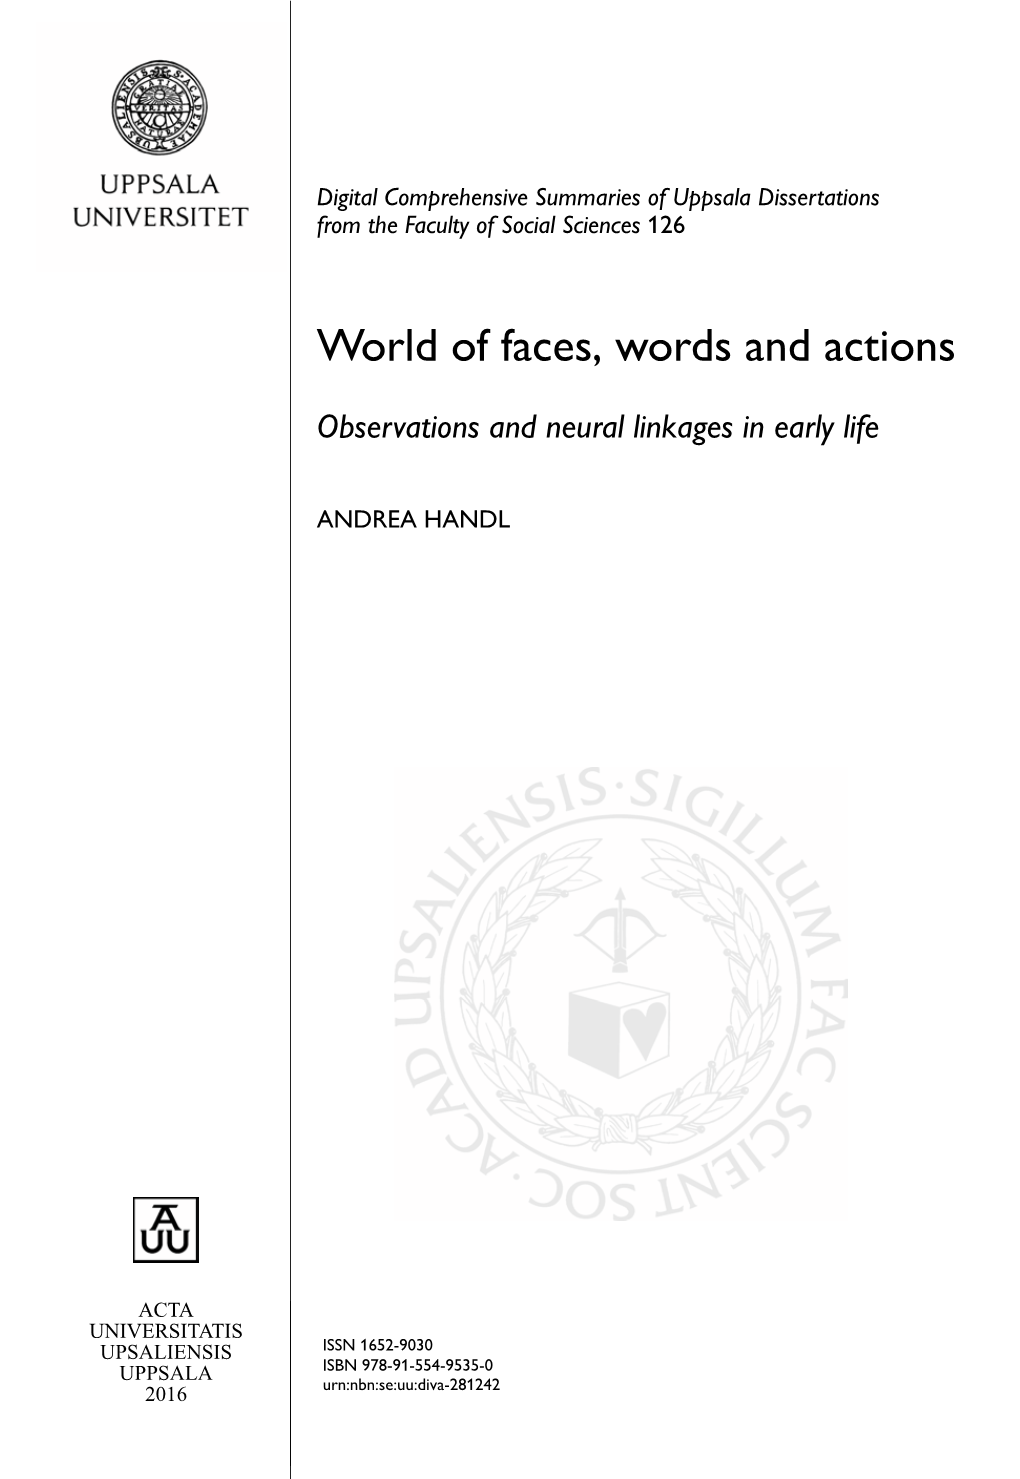 World of Faces, Words and Actions